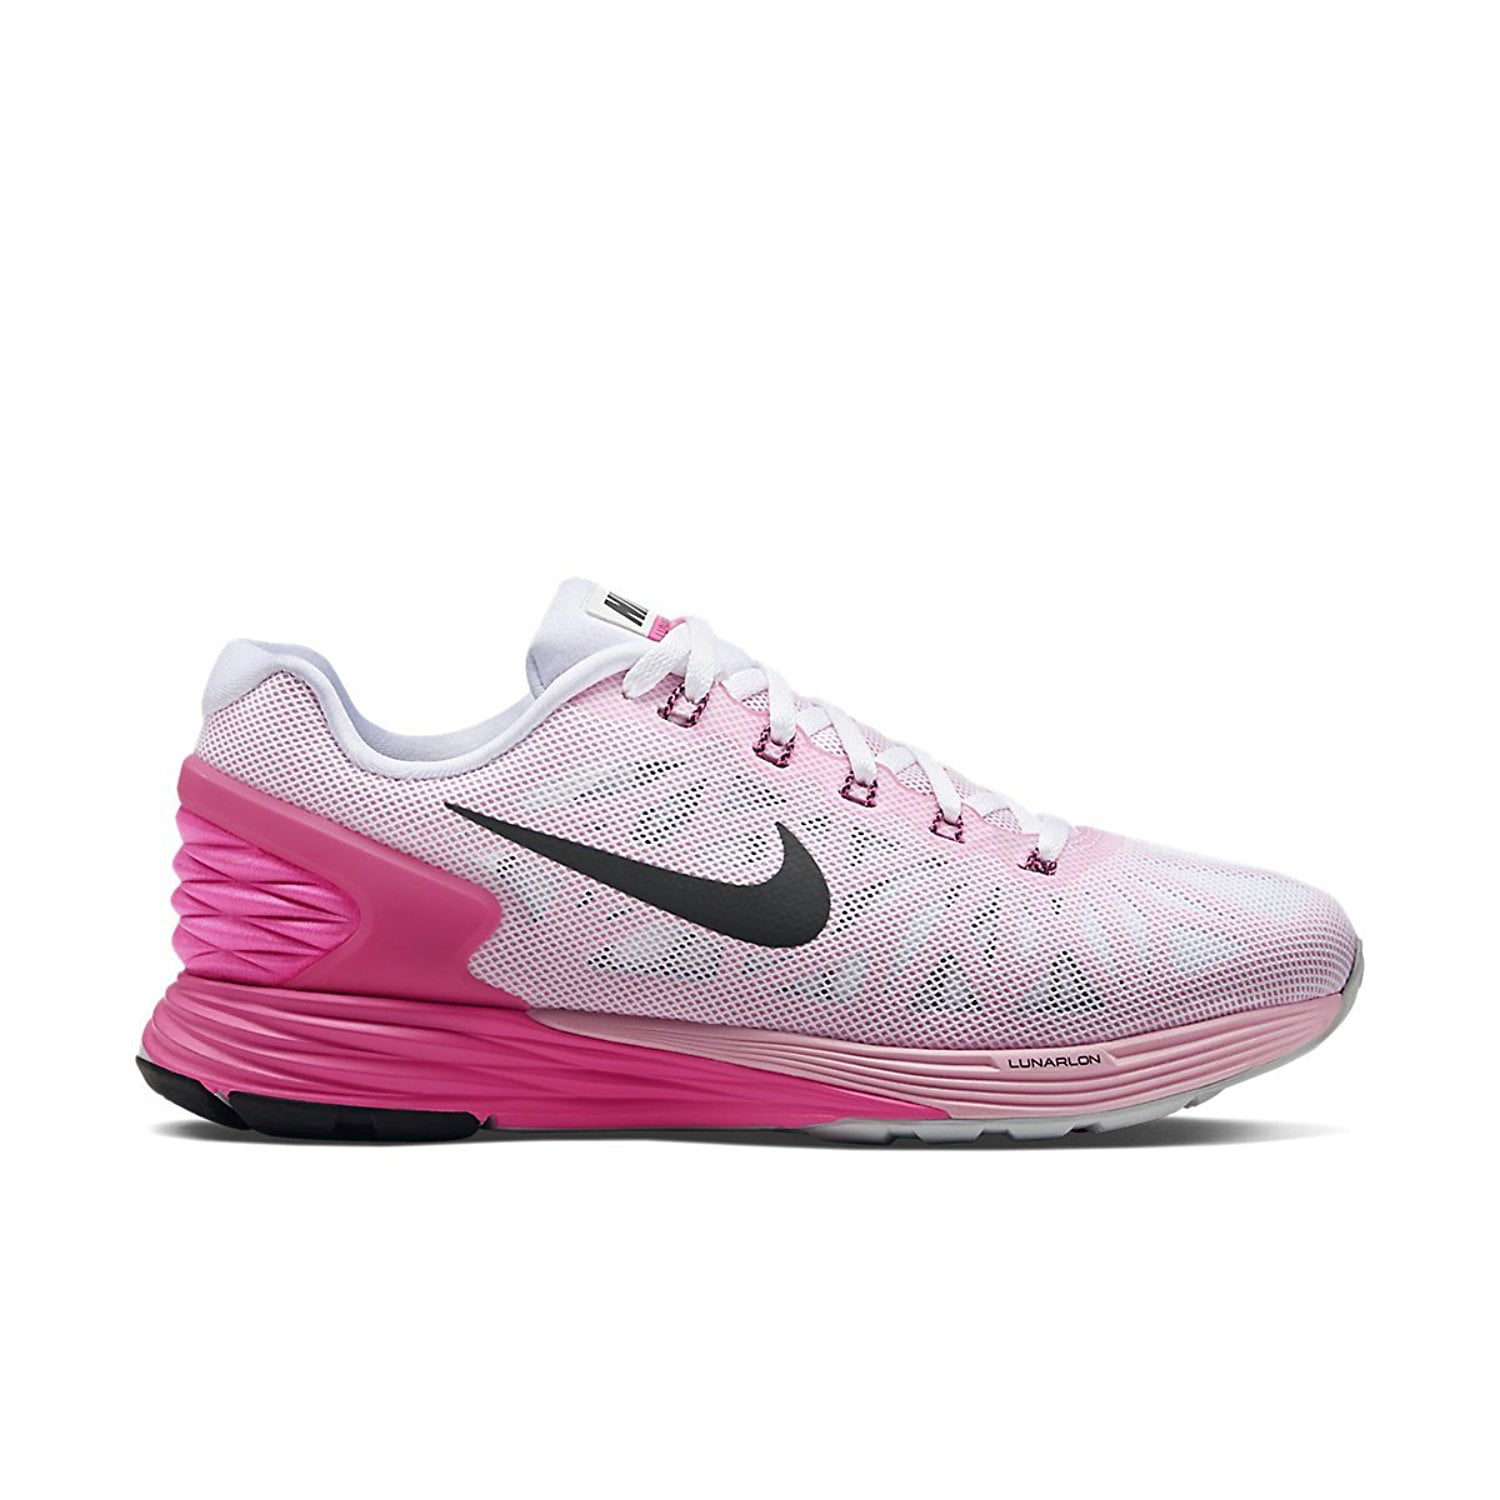 Nike Women's Lunarglide 6 Athletic Running Shoes White/Pink/Black Size ...